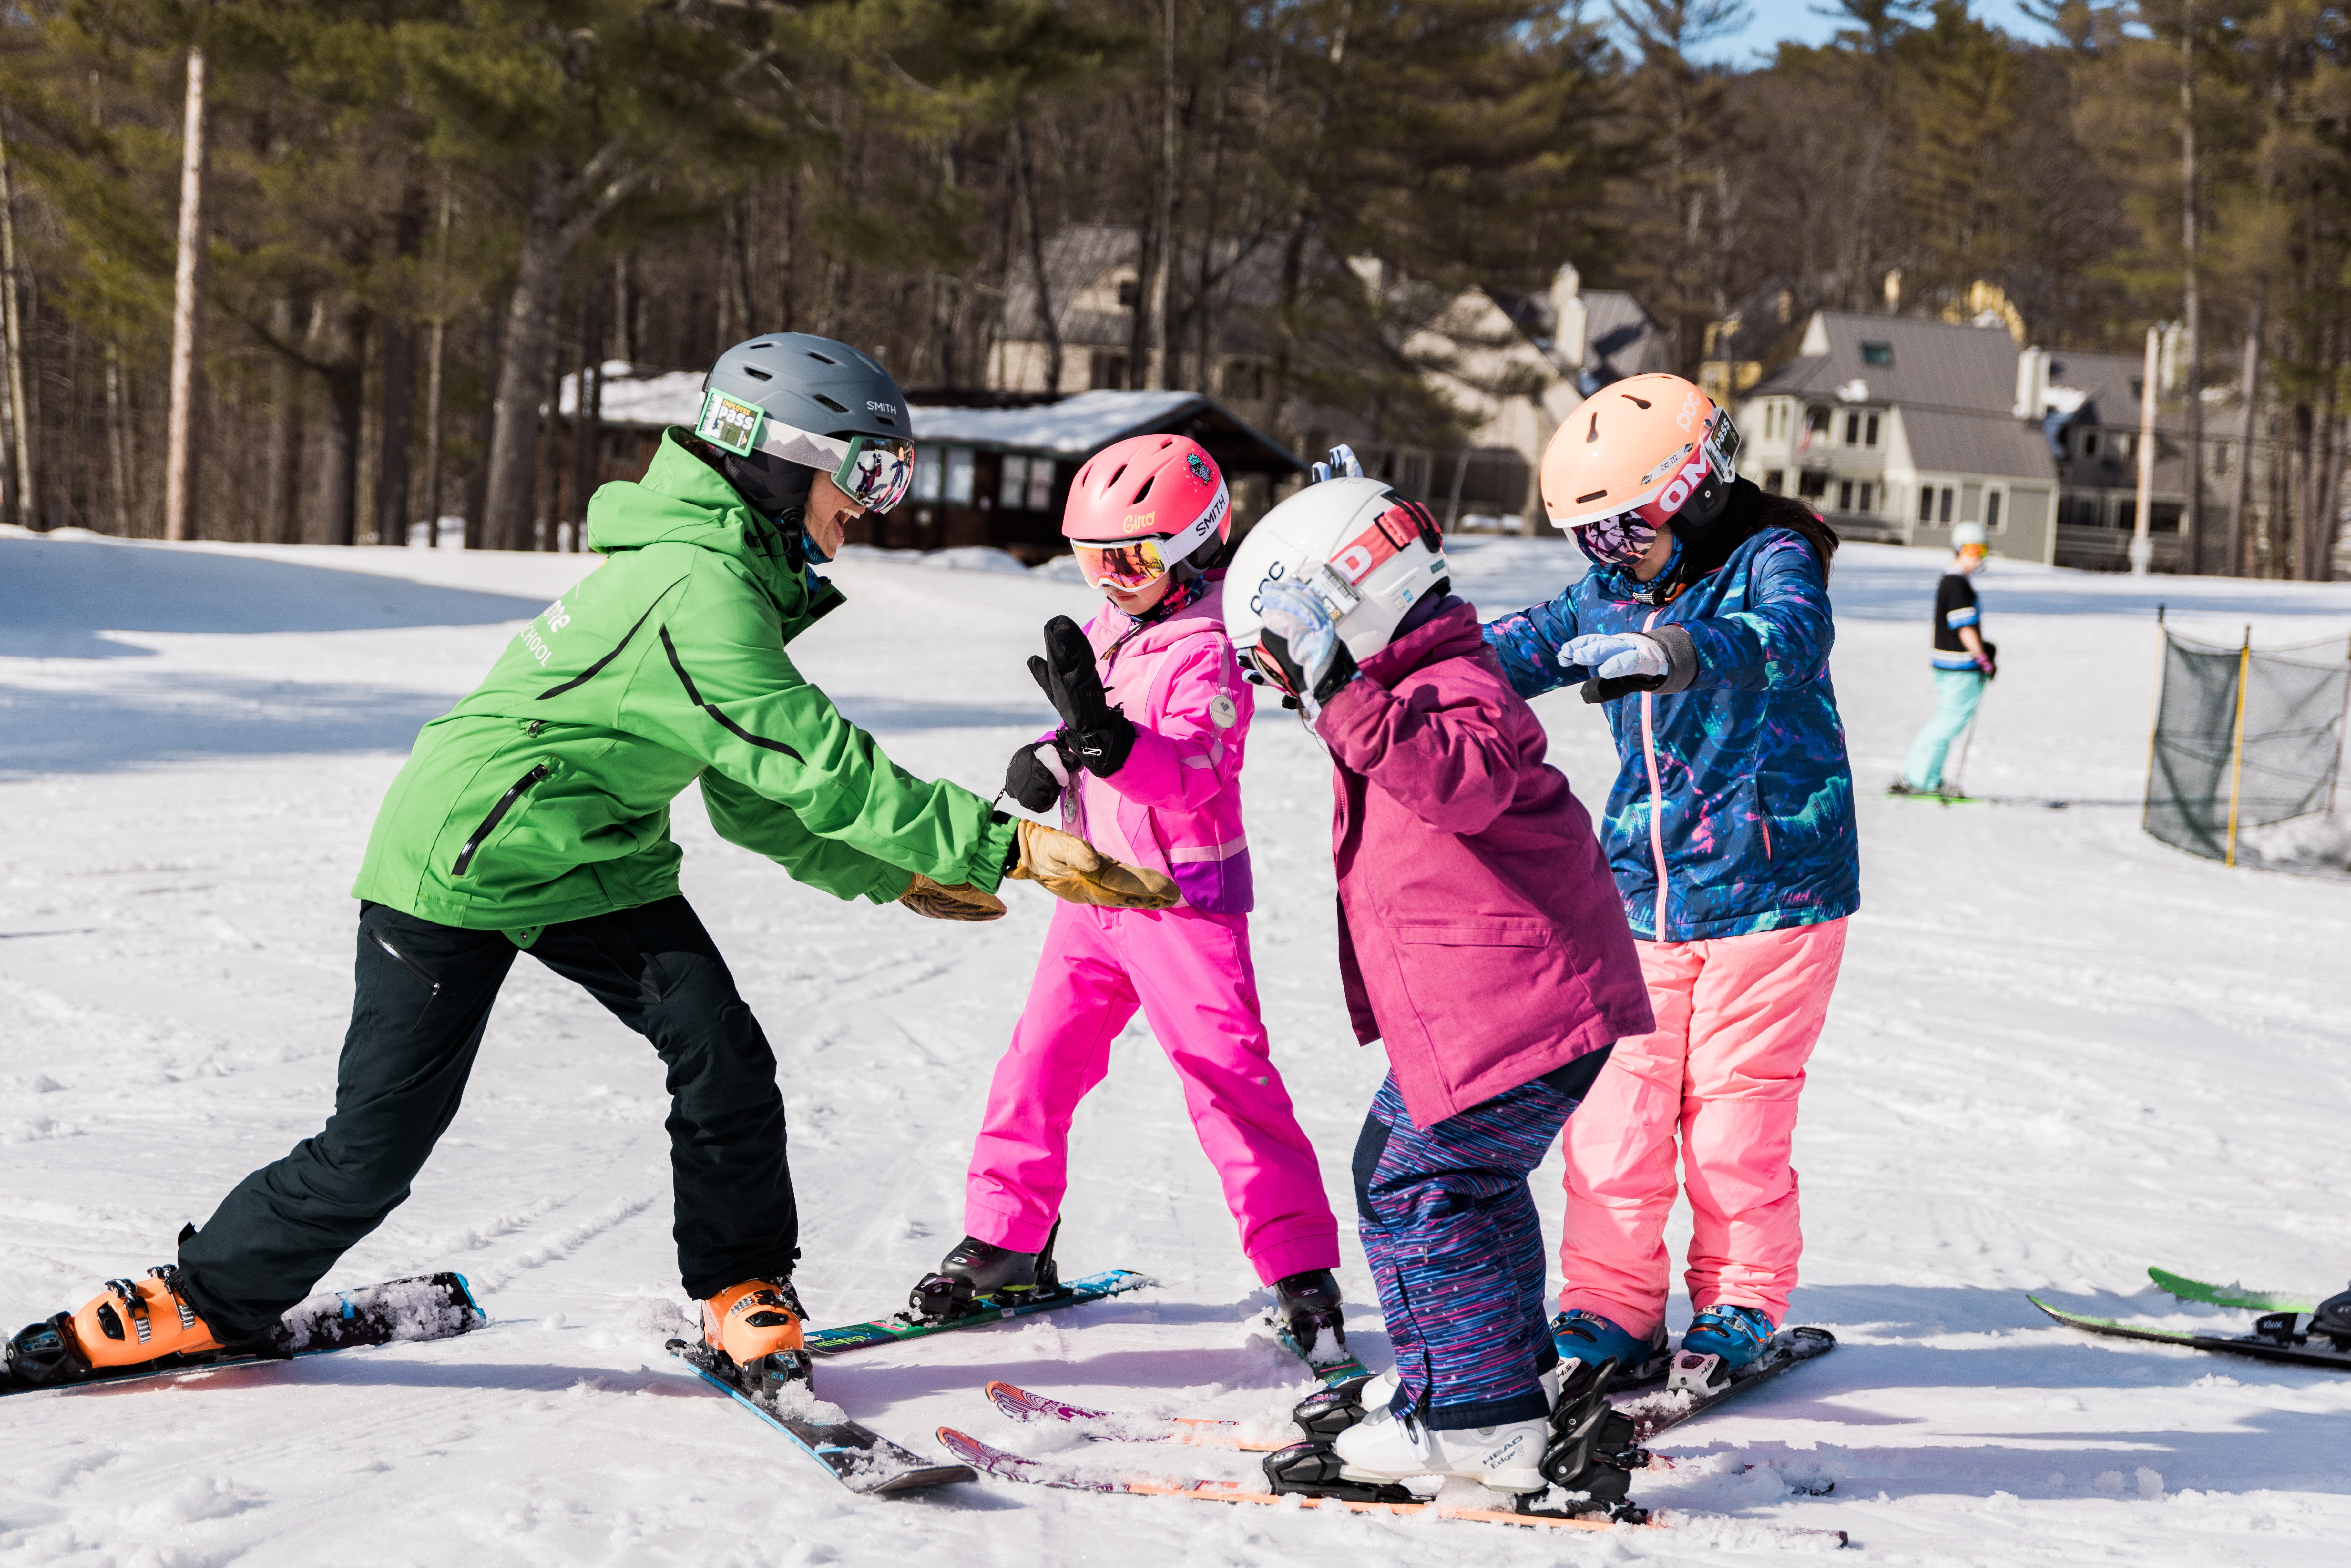 Instructor on skis with three kids learning to ski